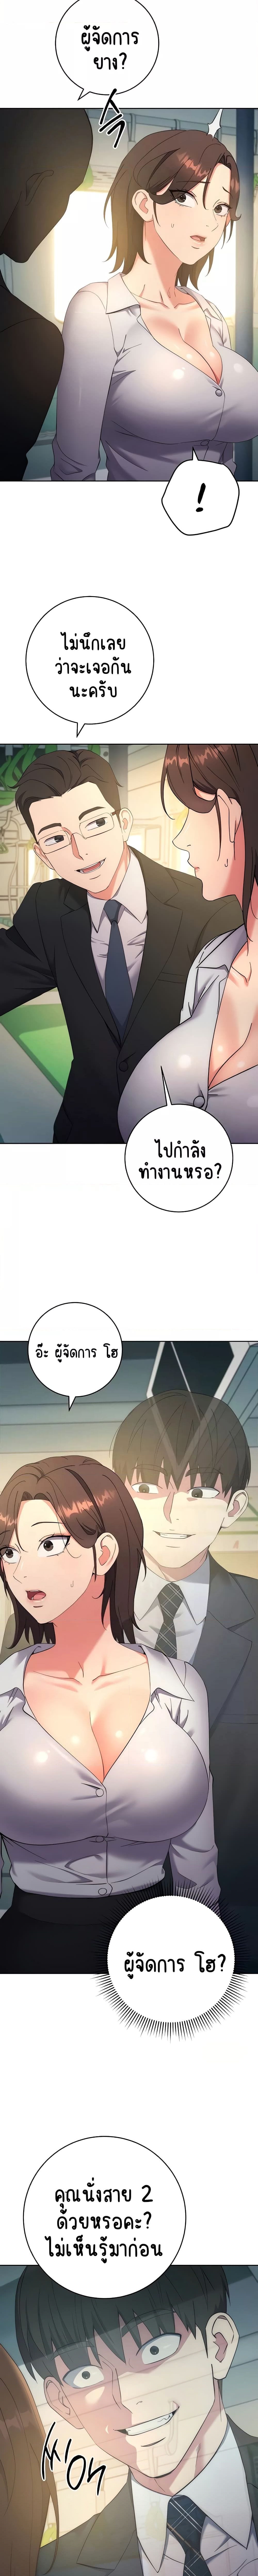 Outsider: The Invisible Man ตอนที่ 9 ภาพ 12